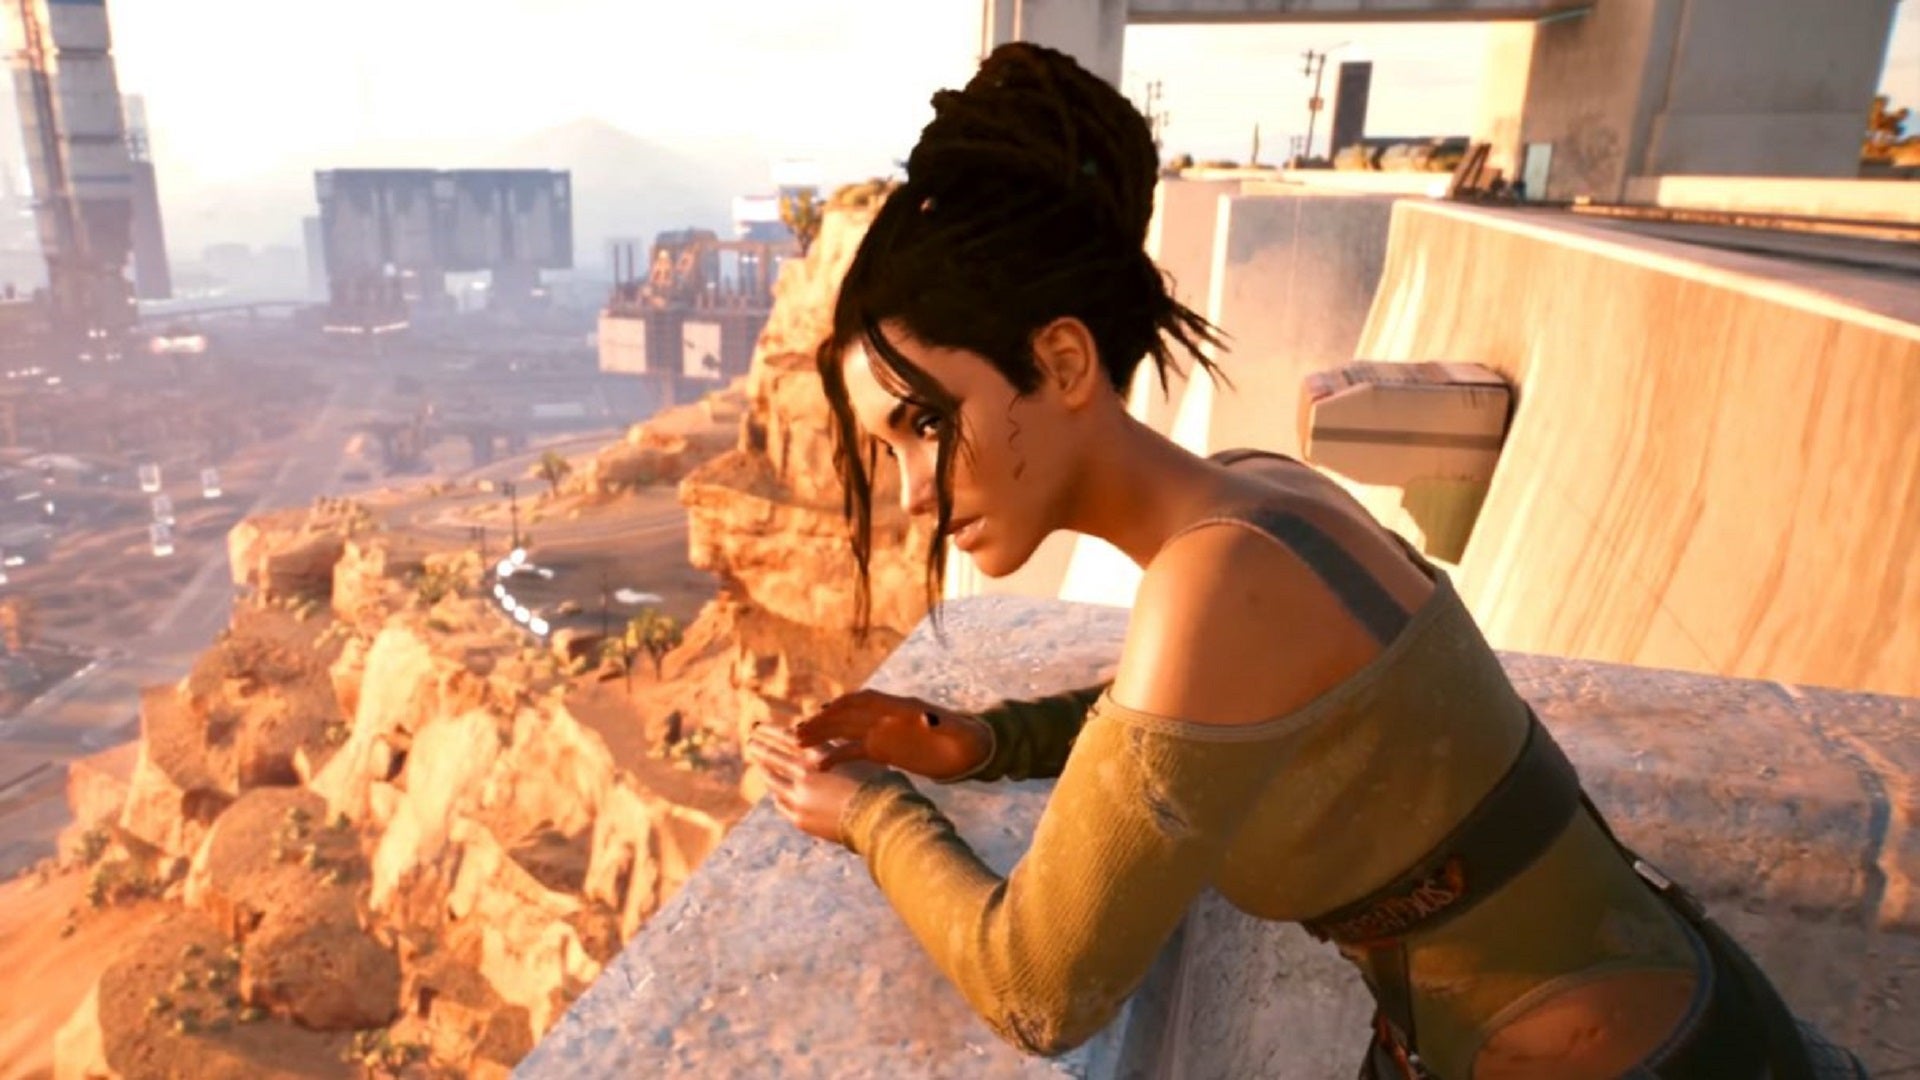 Panam from Cyberpunk 2077, as she leans on a balcony overlooking a nomad settlement.